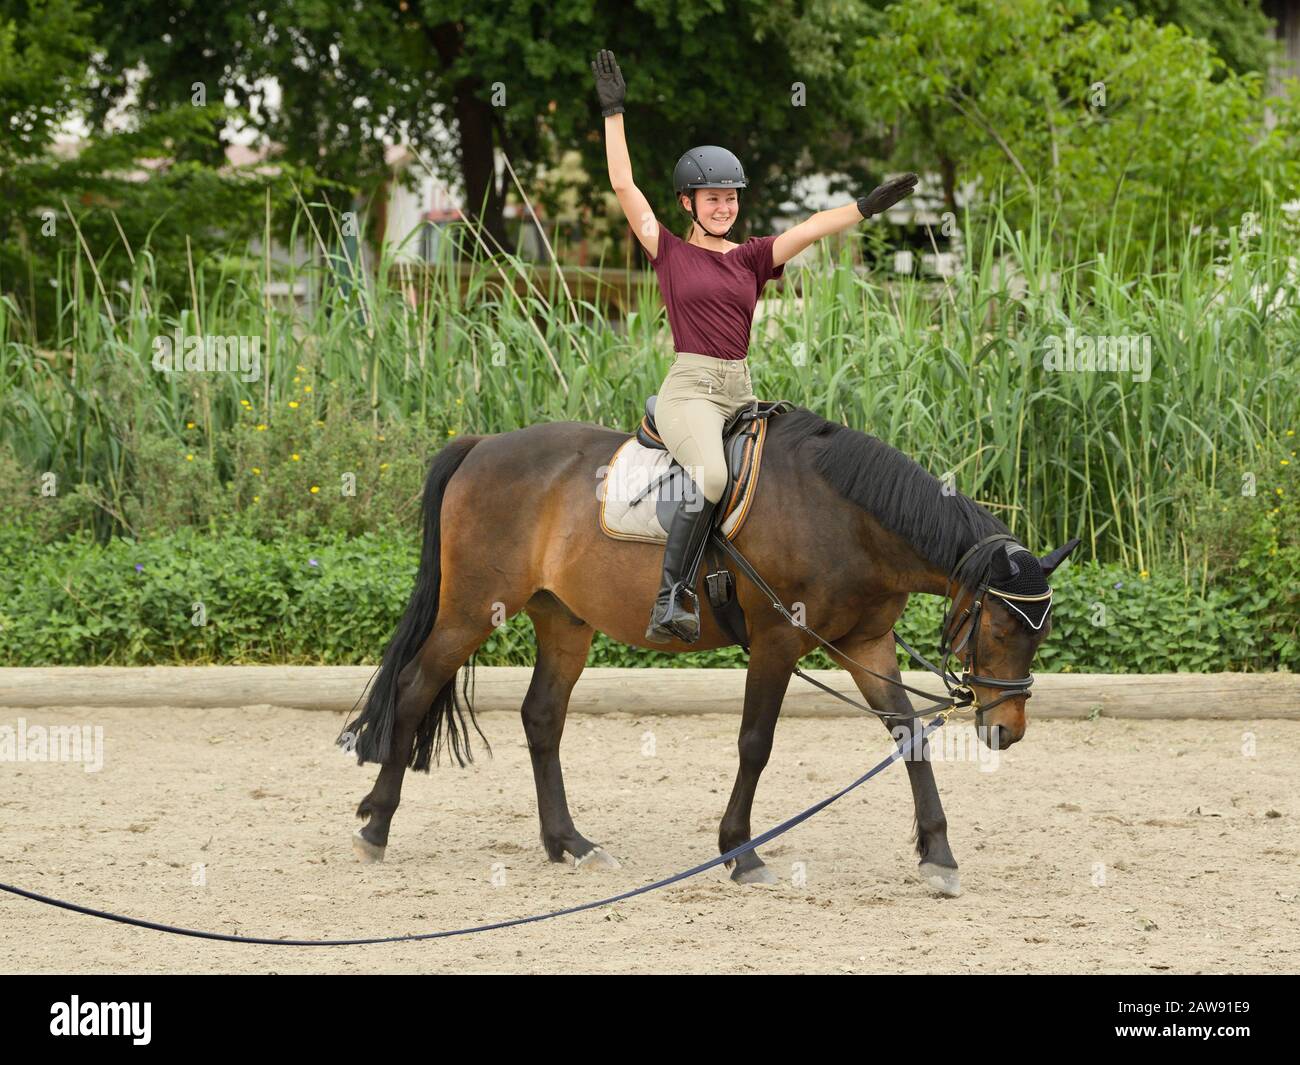 Lunge riding lesson, girl on German pony Stock Photo